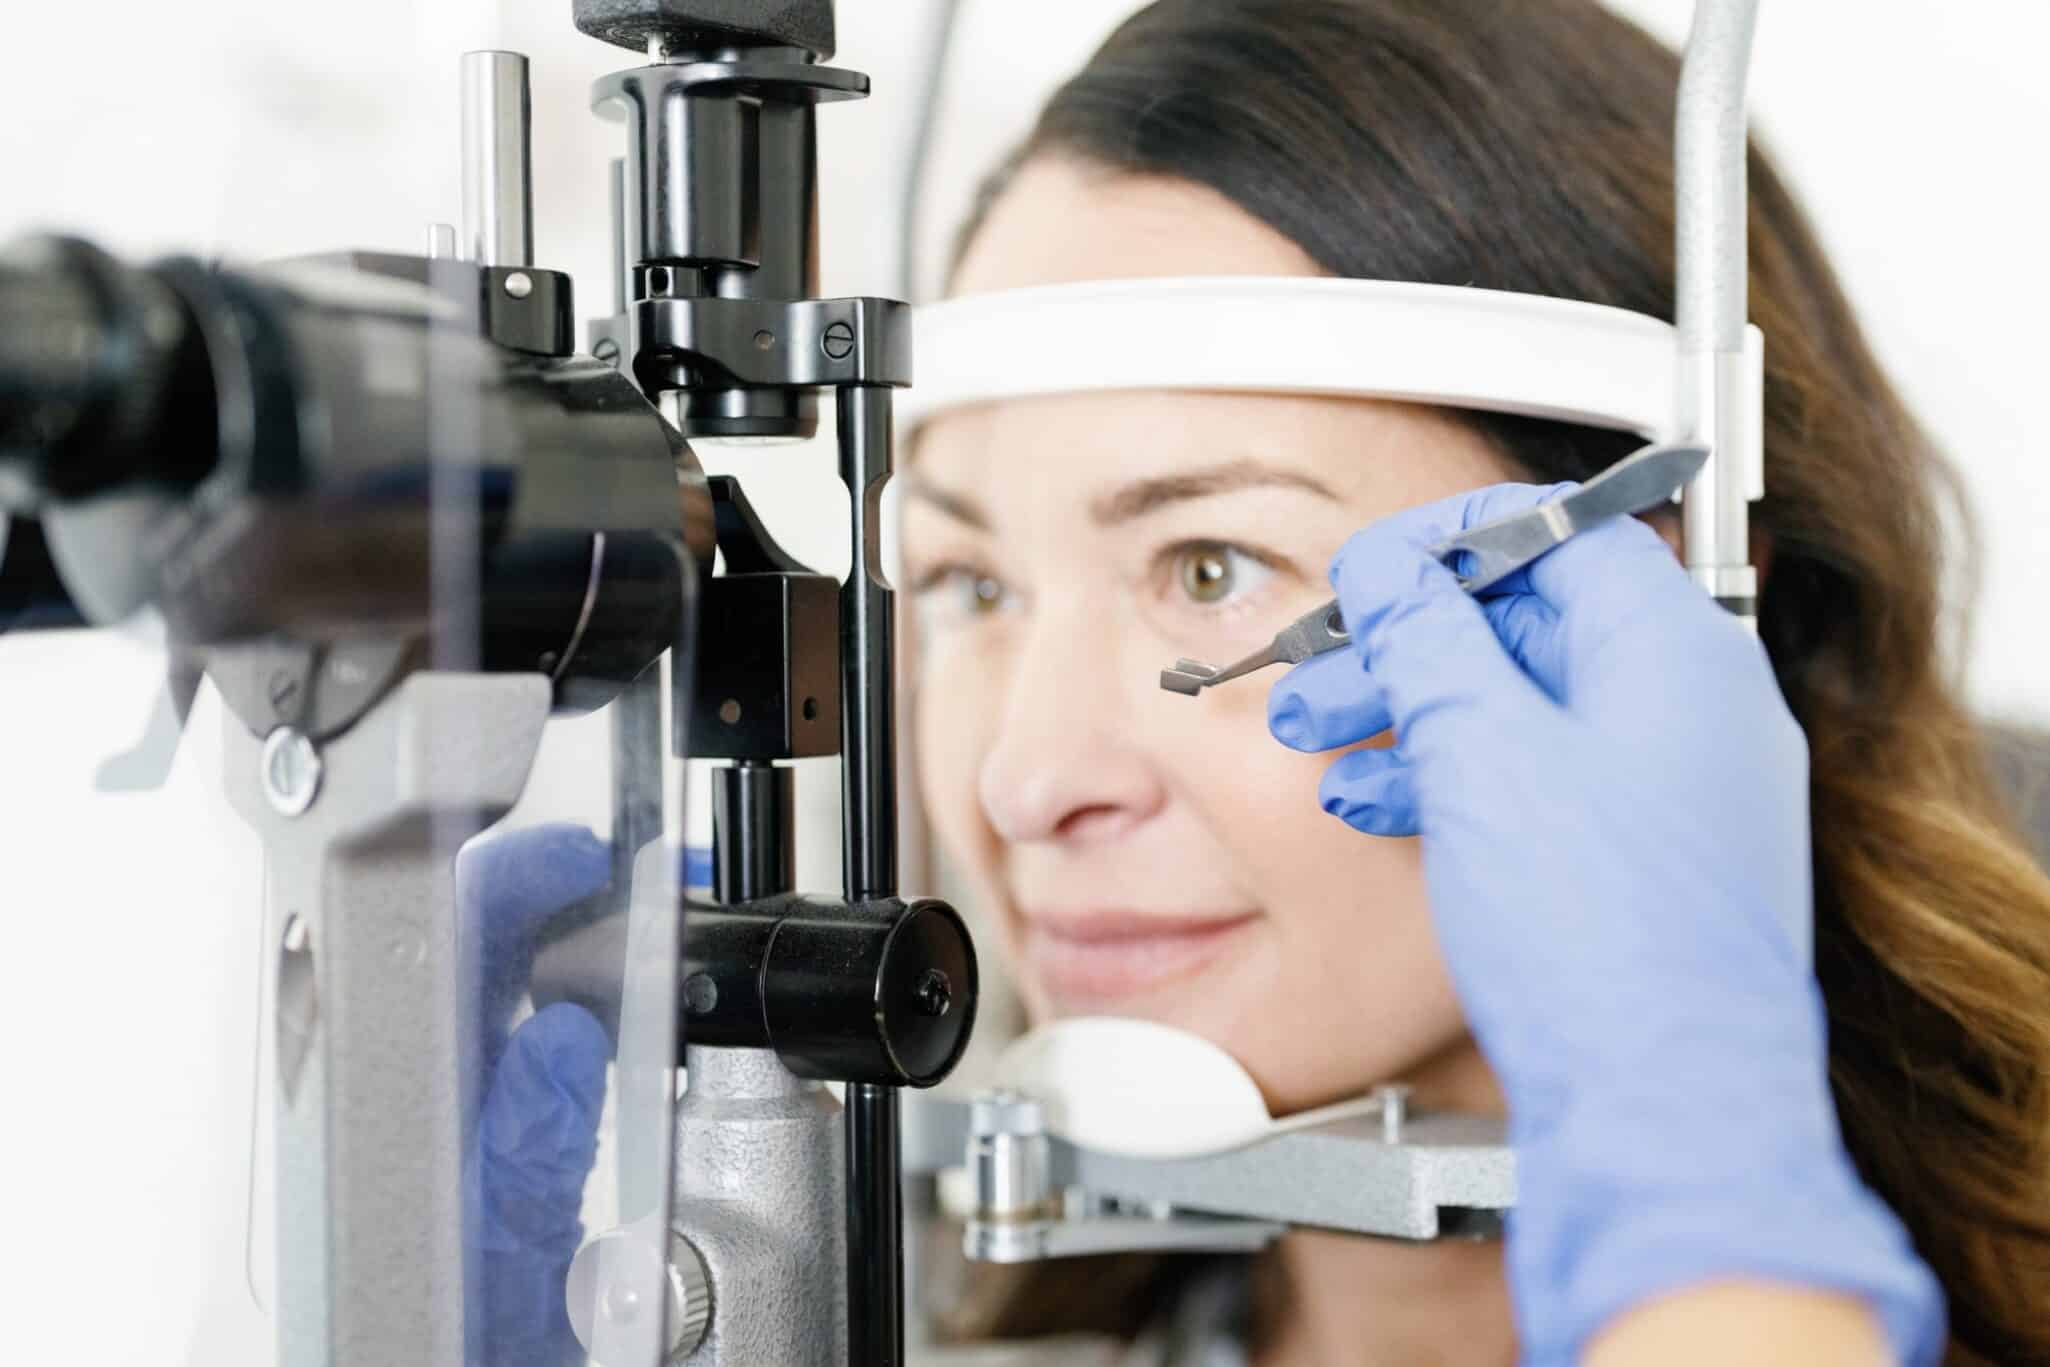 female patient undergoing eye exam with ophthalmologist's hand holding small instrument near eye